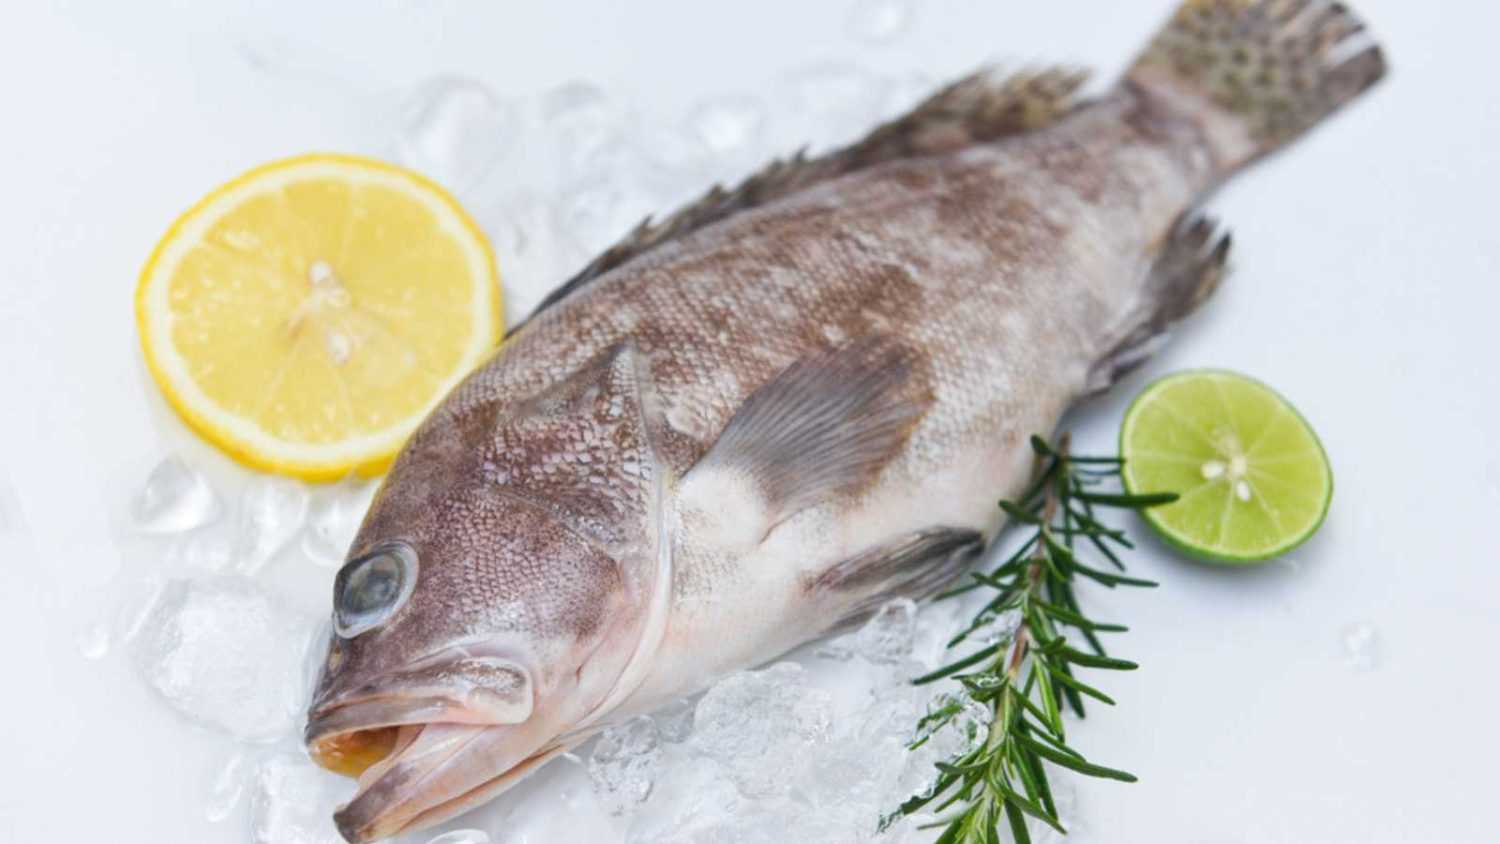 Fresh raw seafood fish for cooked food, Grouper fish on ice with rosemary lemon